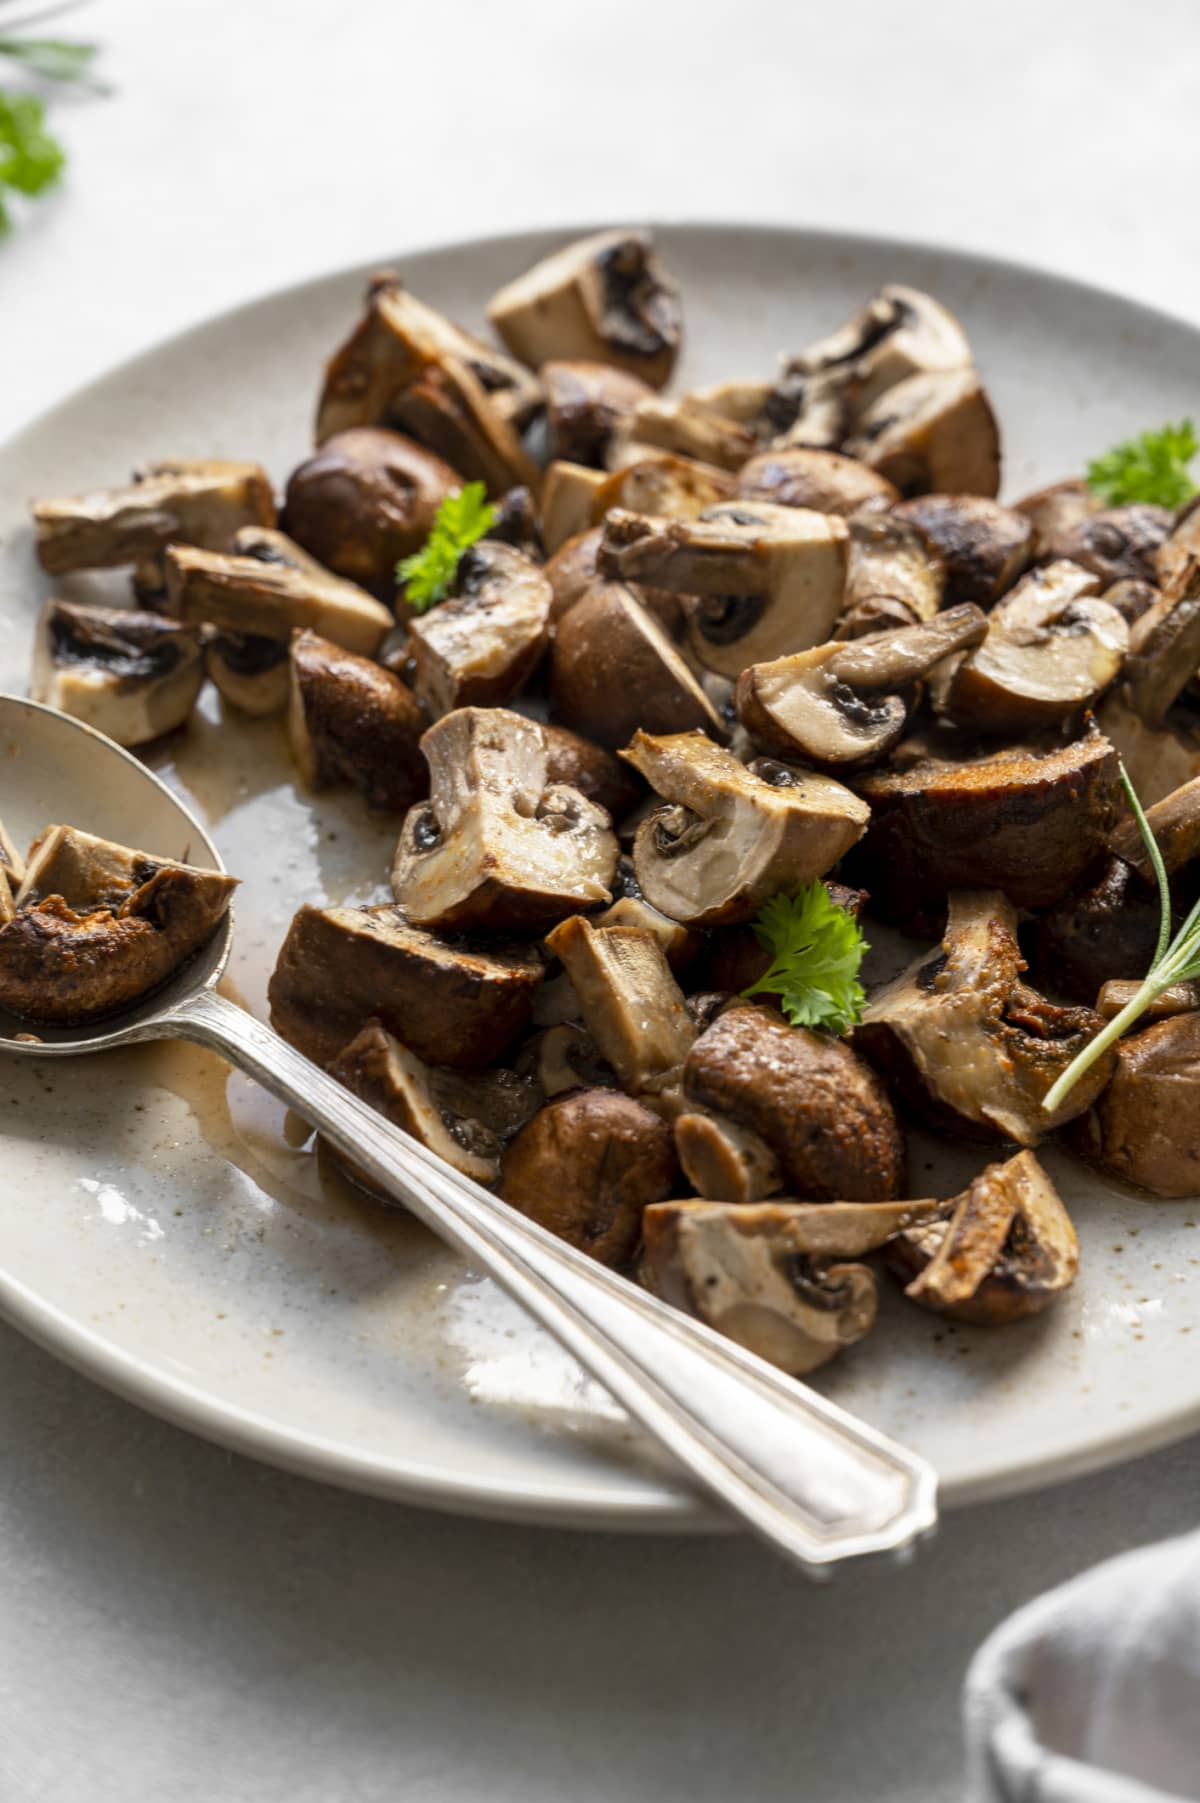 Roasted mushrooms on a white plate with herbs and a silver spoon